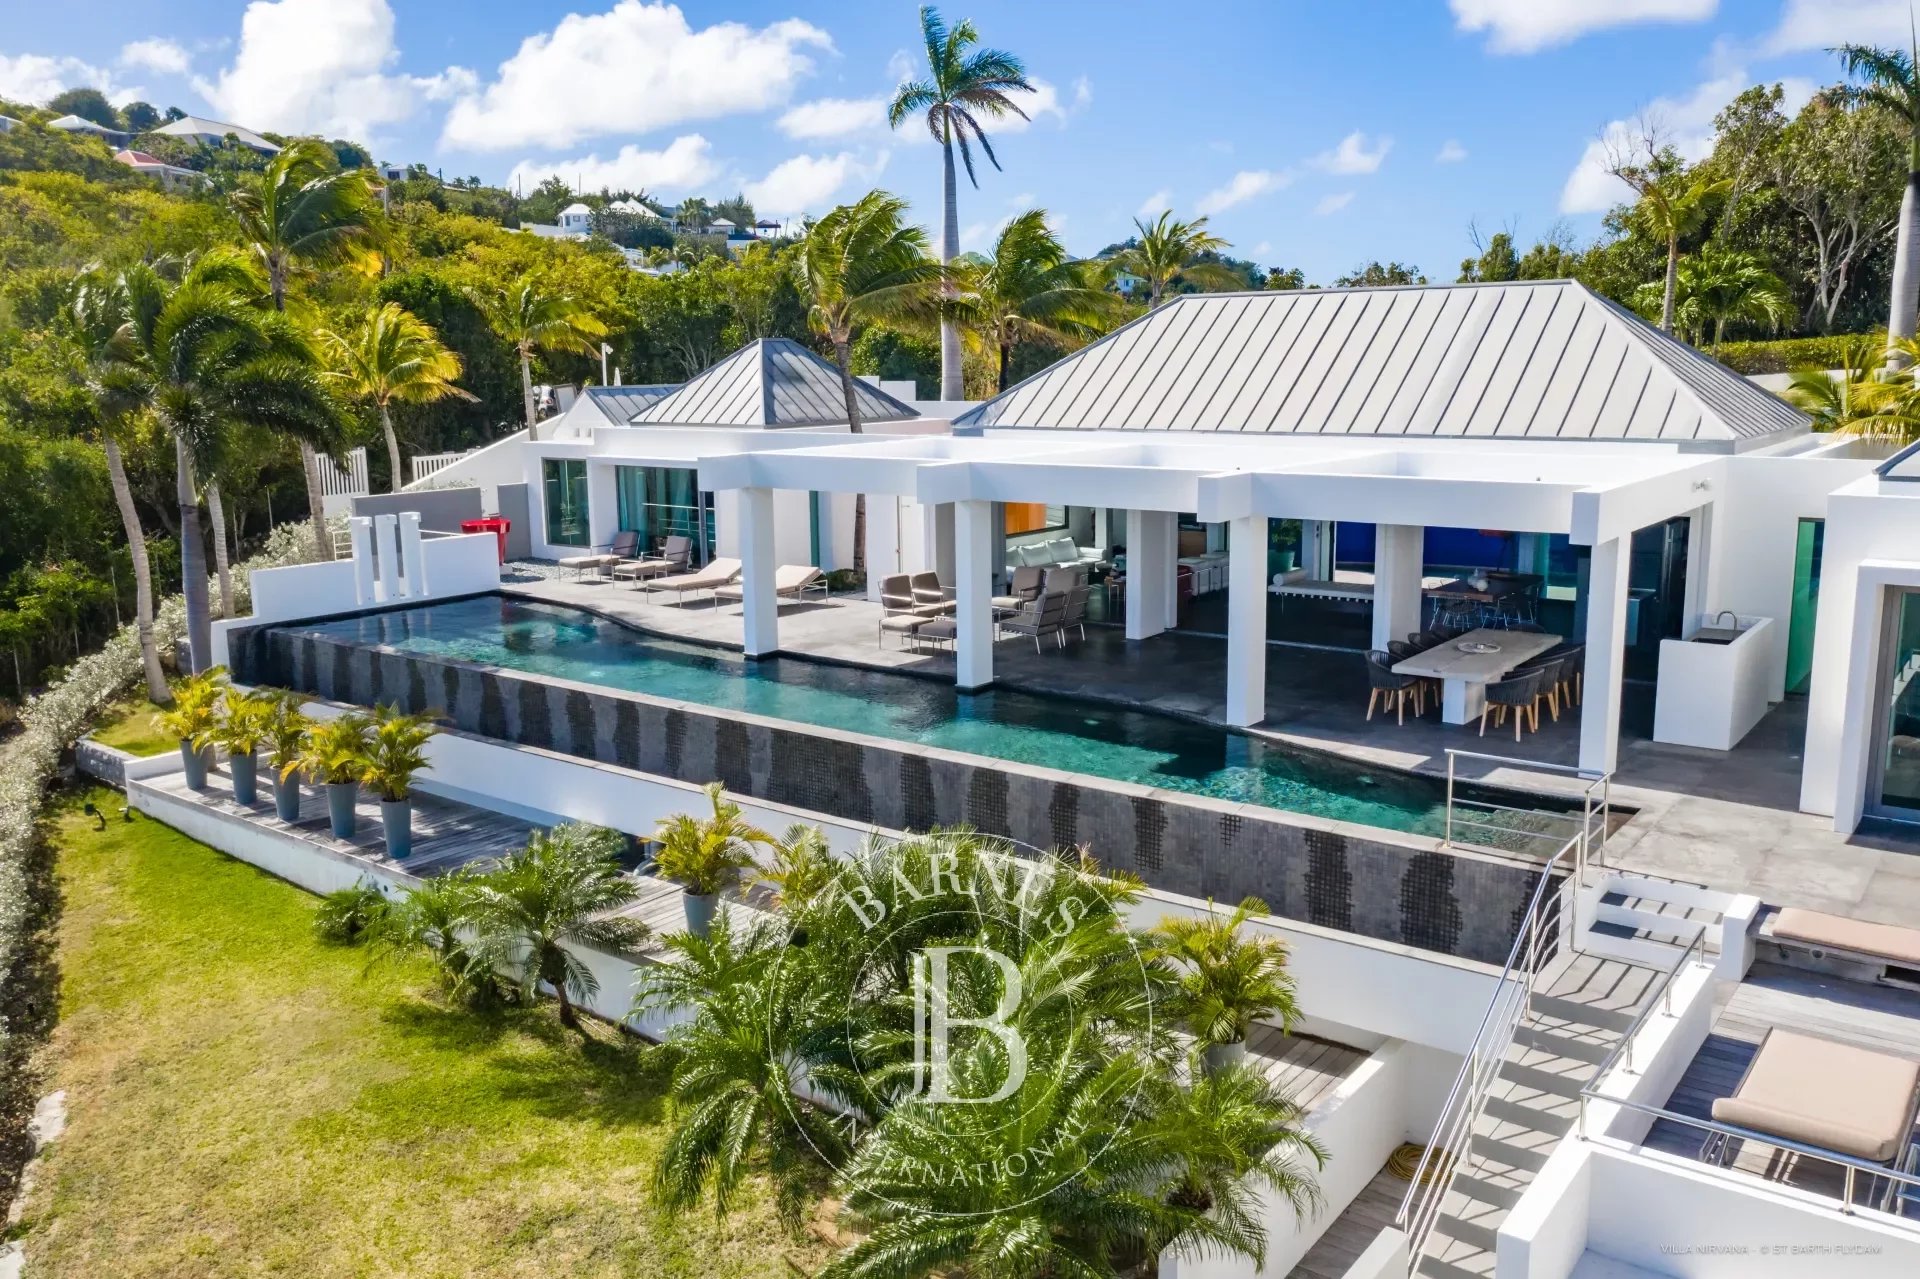 5-Bedroom Villa in St.Barths - picture 3 title=